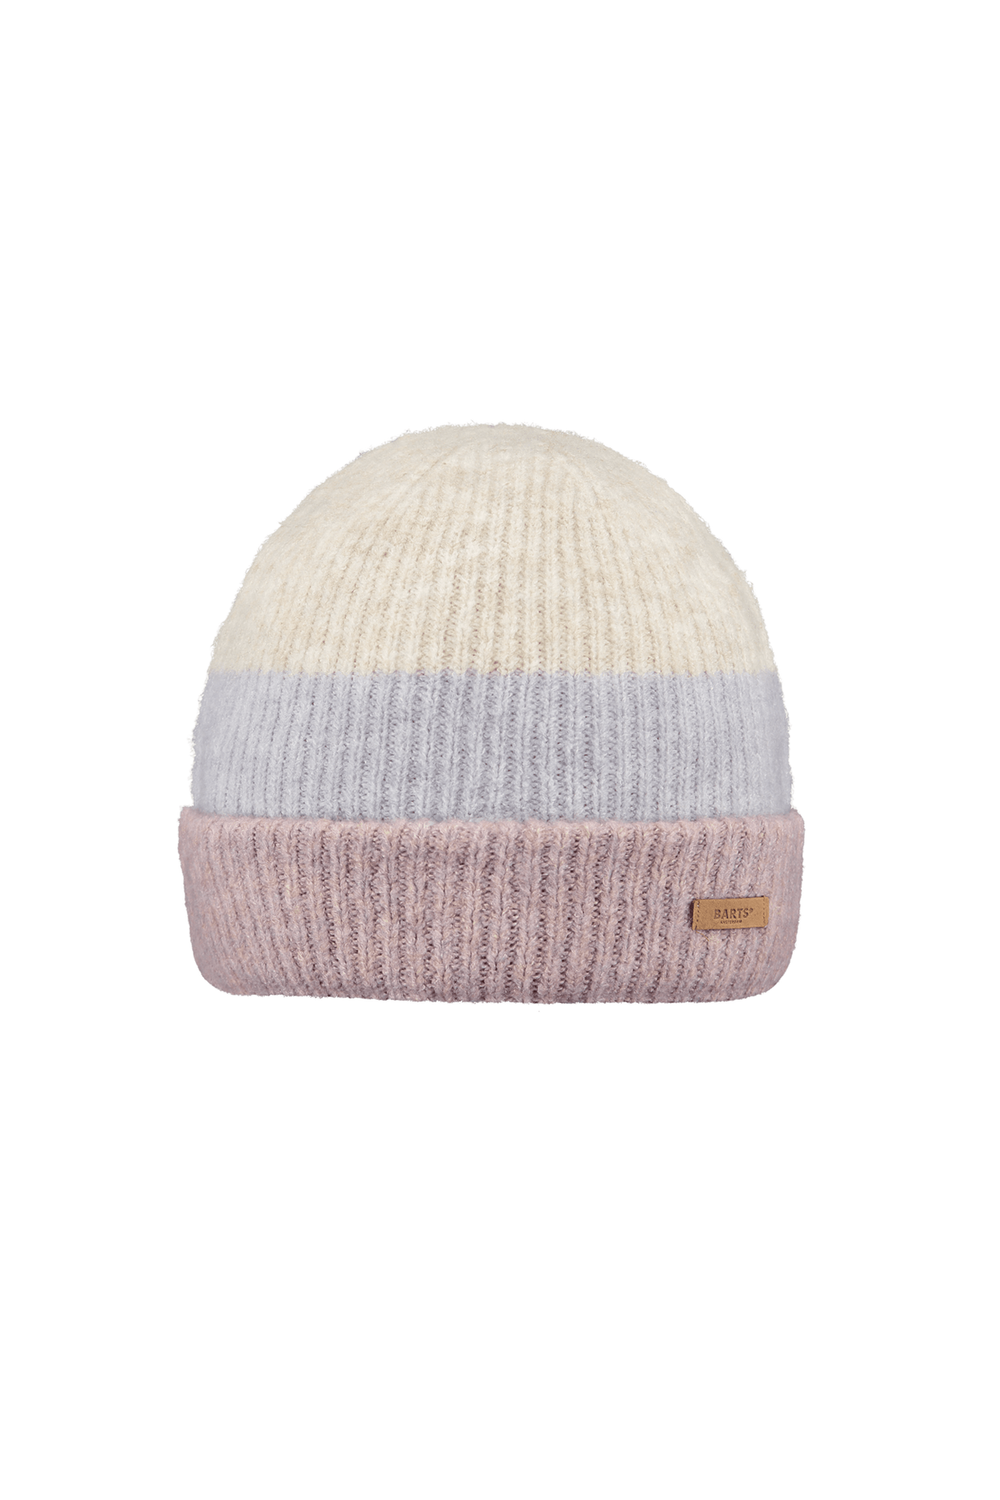 Orchid Barts Beanie Suzam